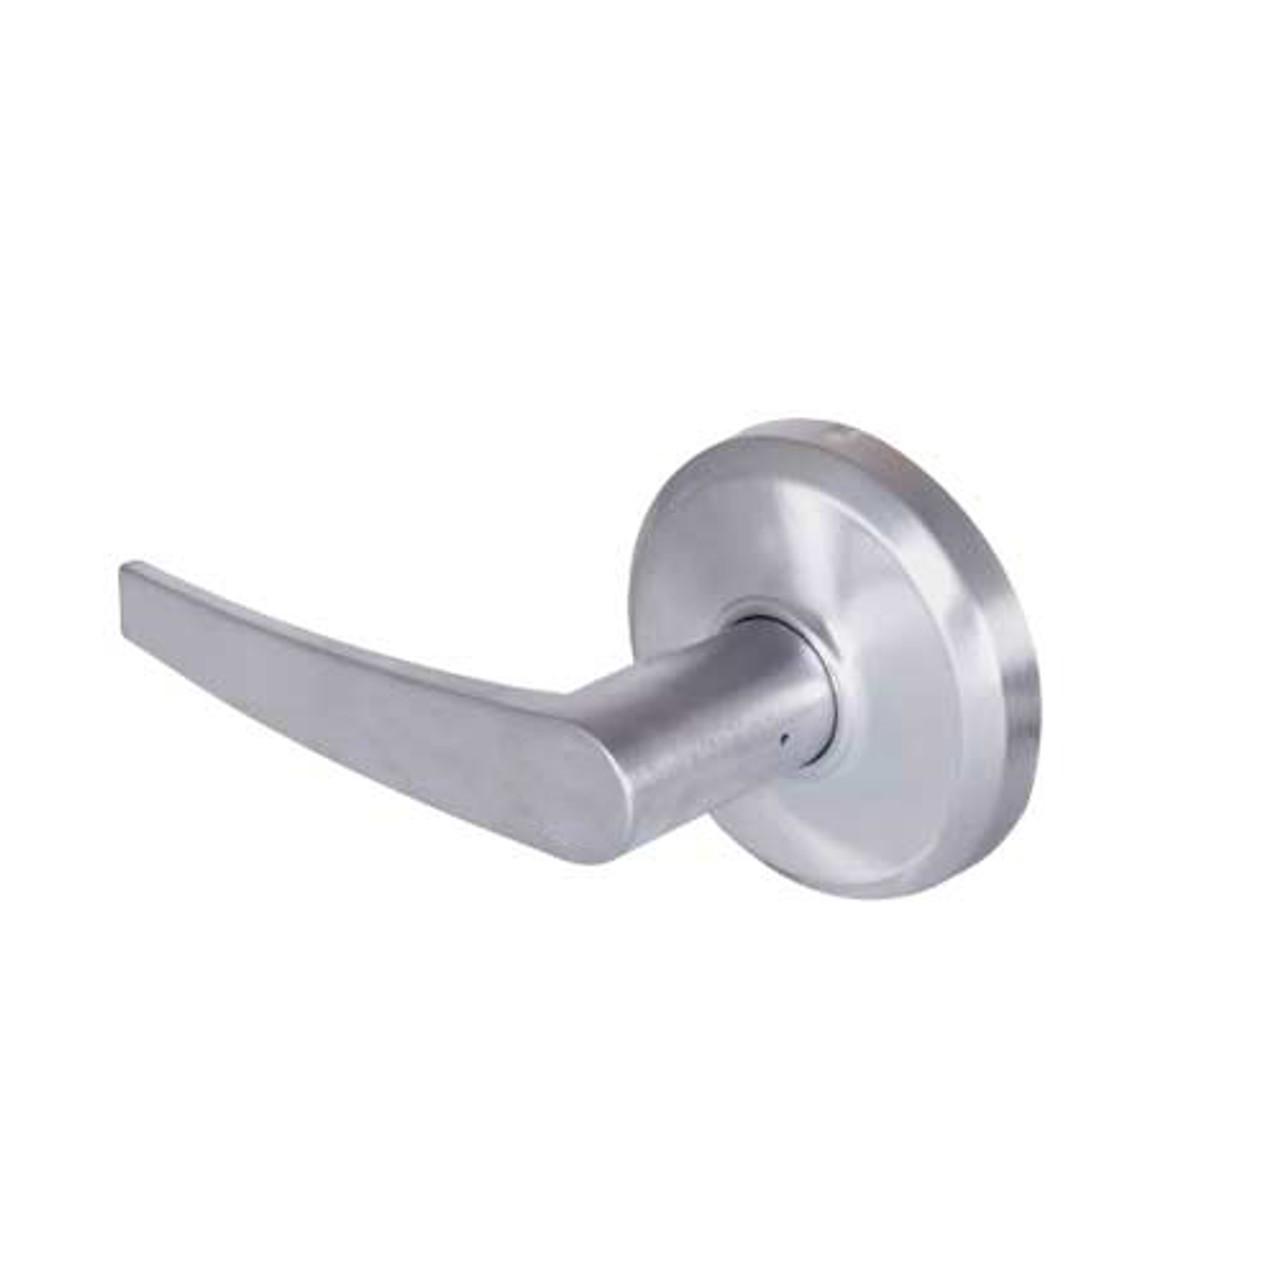 QCL235A626NS8478S Stanley QCL200 Series Cylindrical Communicating Lock with Slate Lever in Satin Chrome Finish